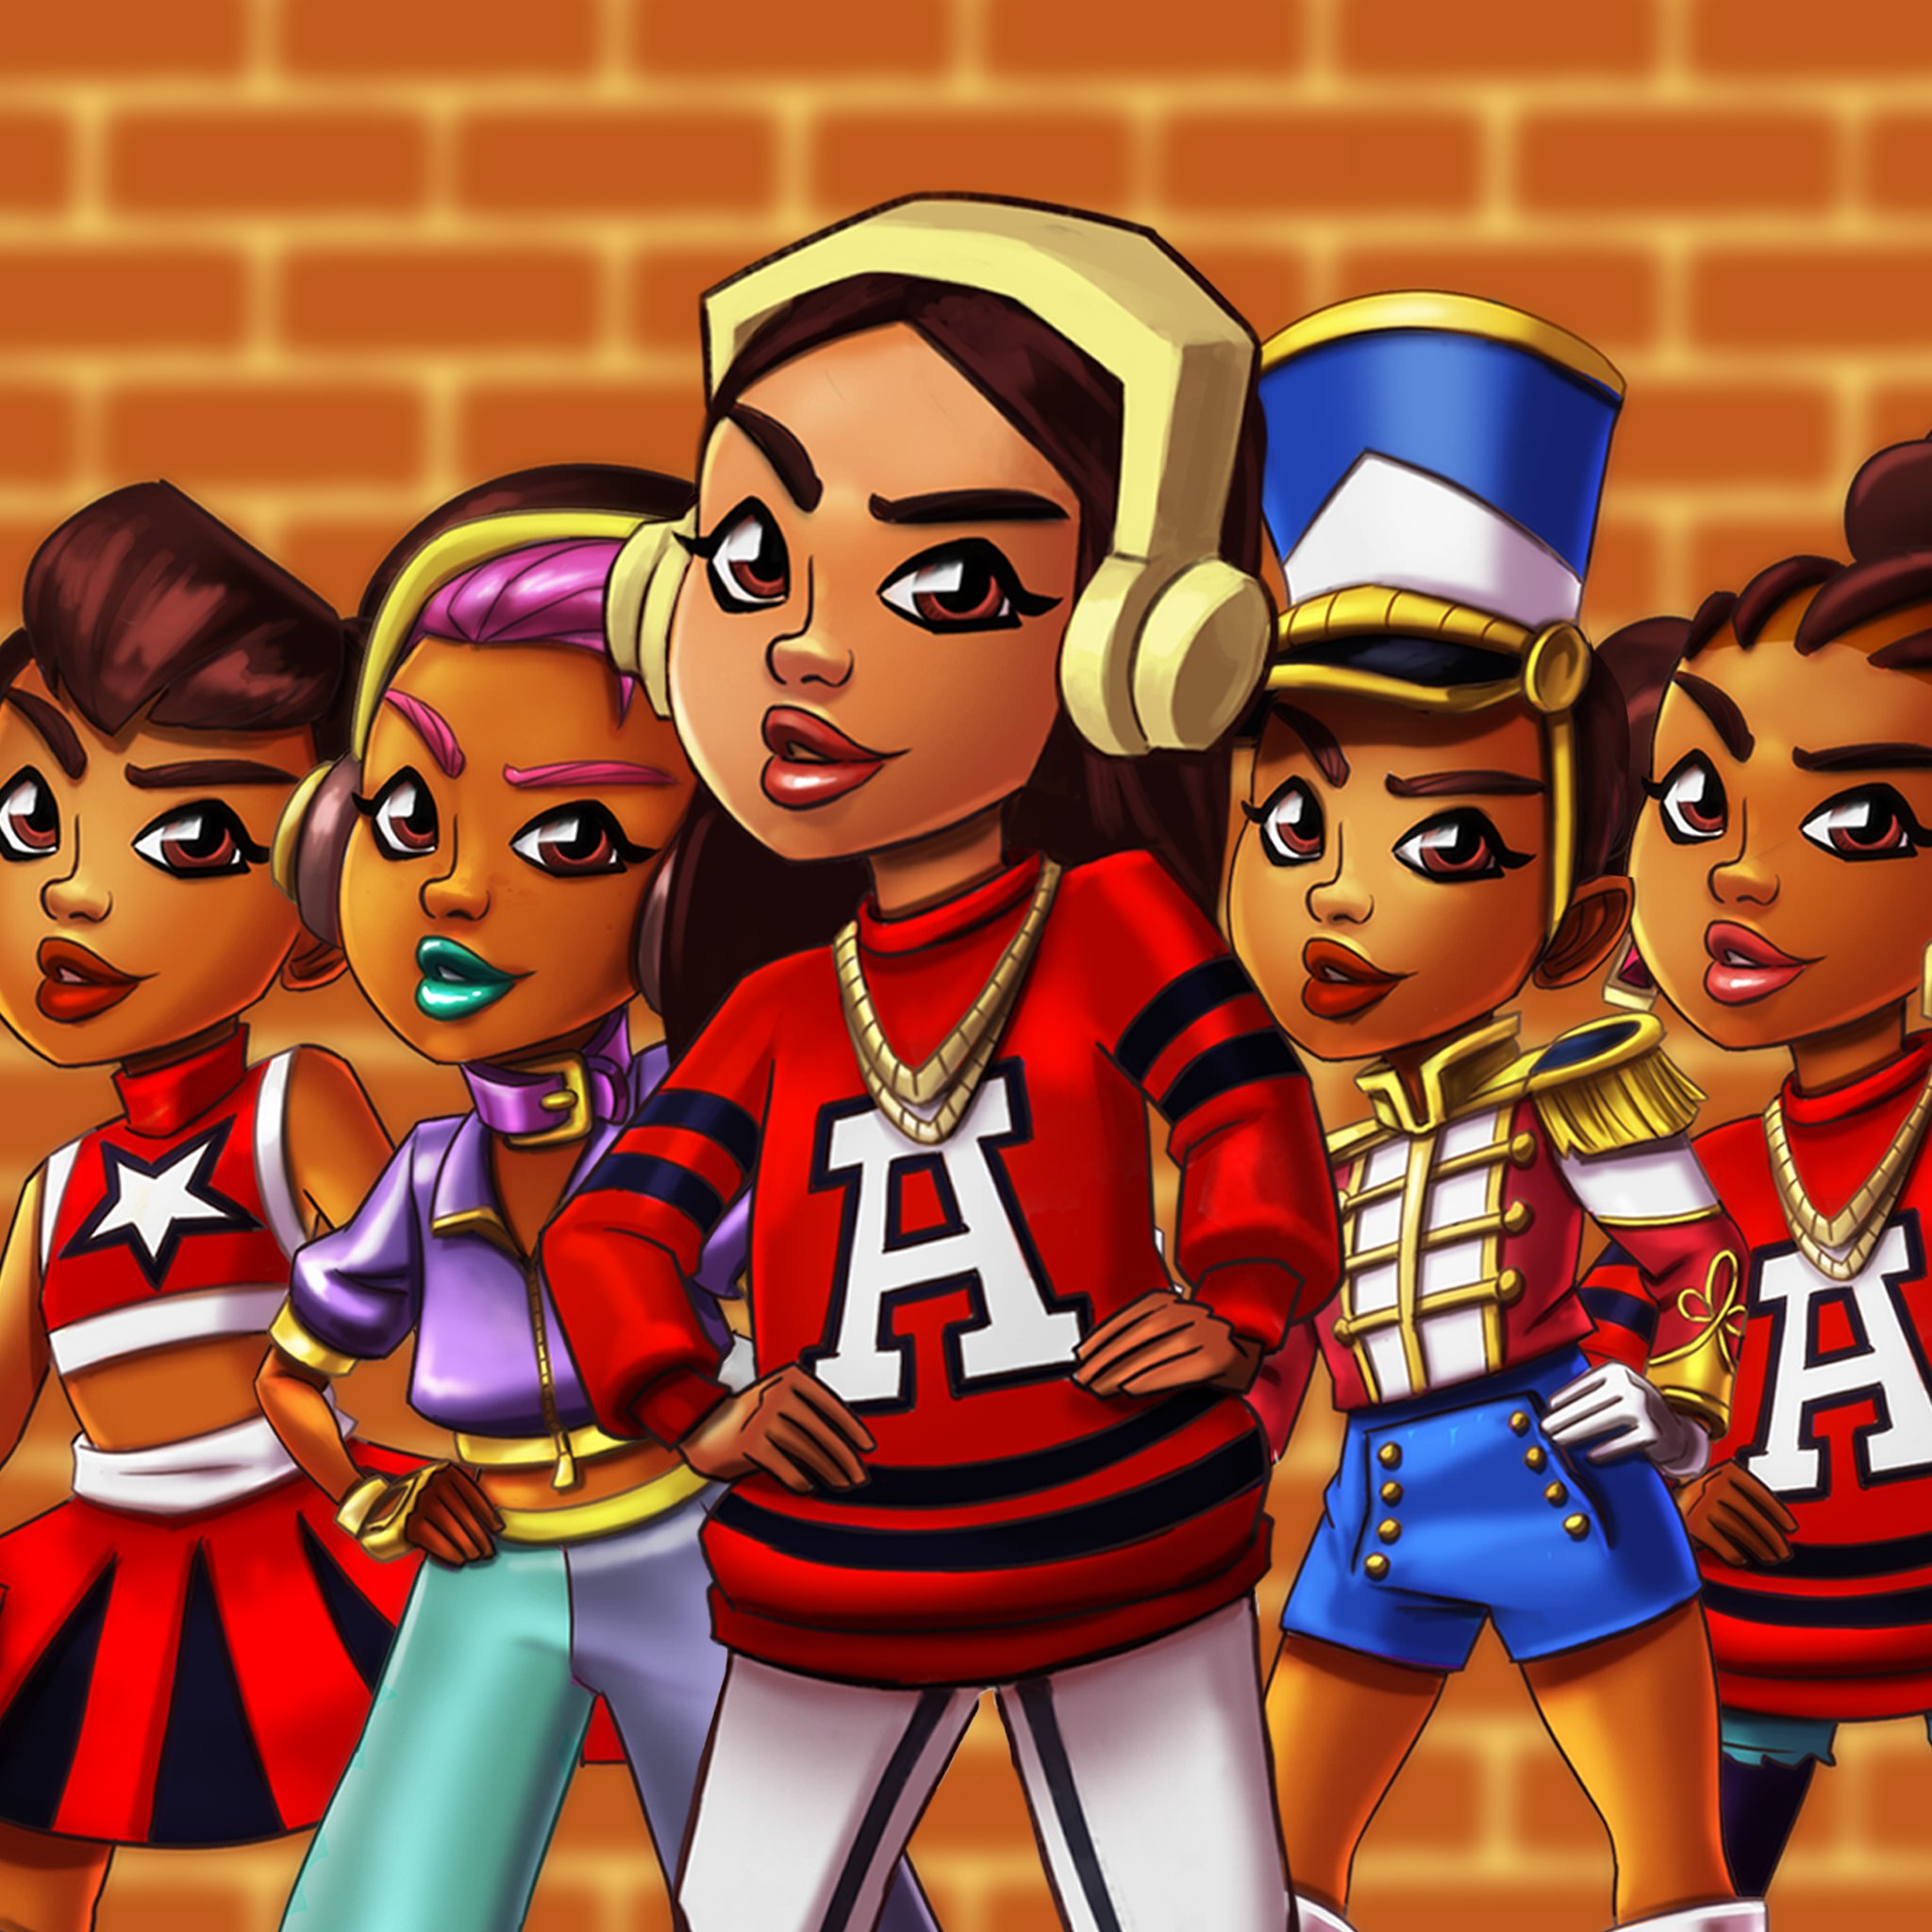 Subway Surfers on X: #conceptclass 8: interested in concept art